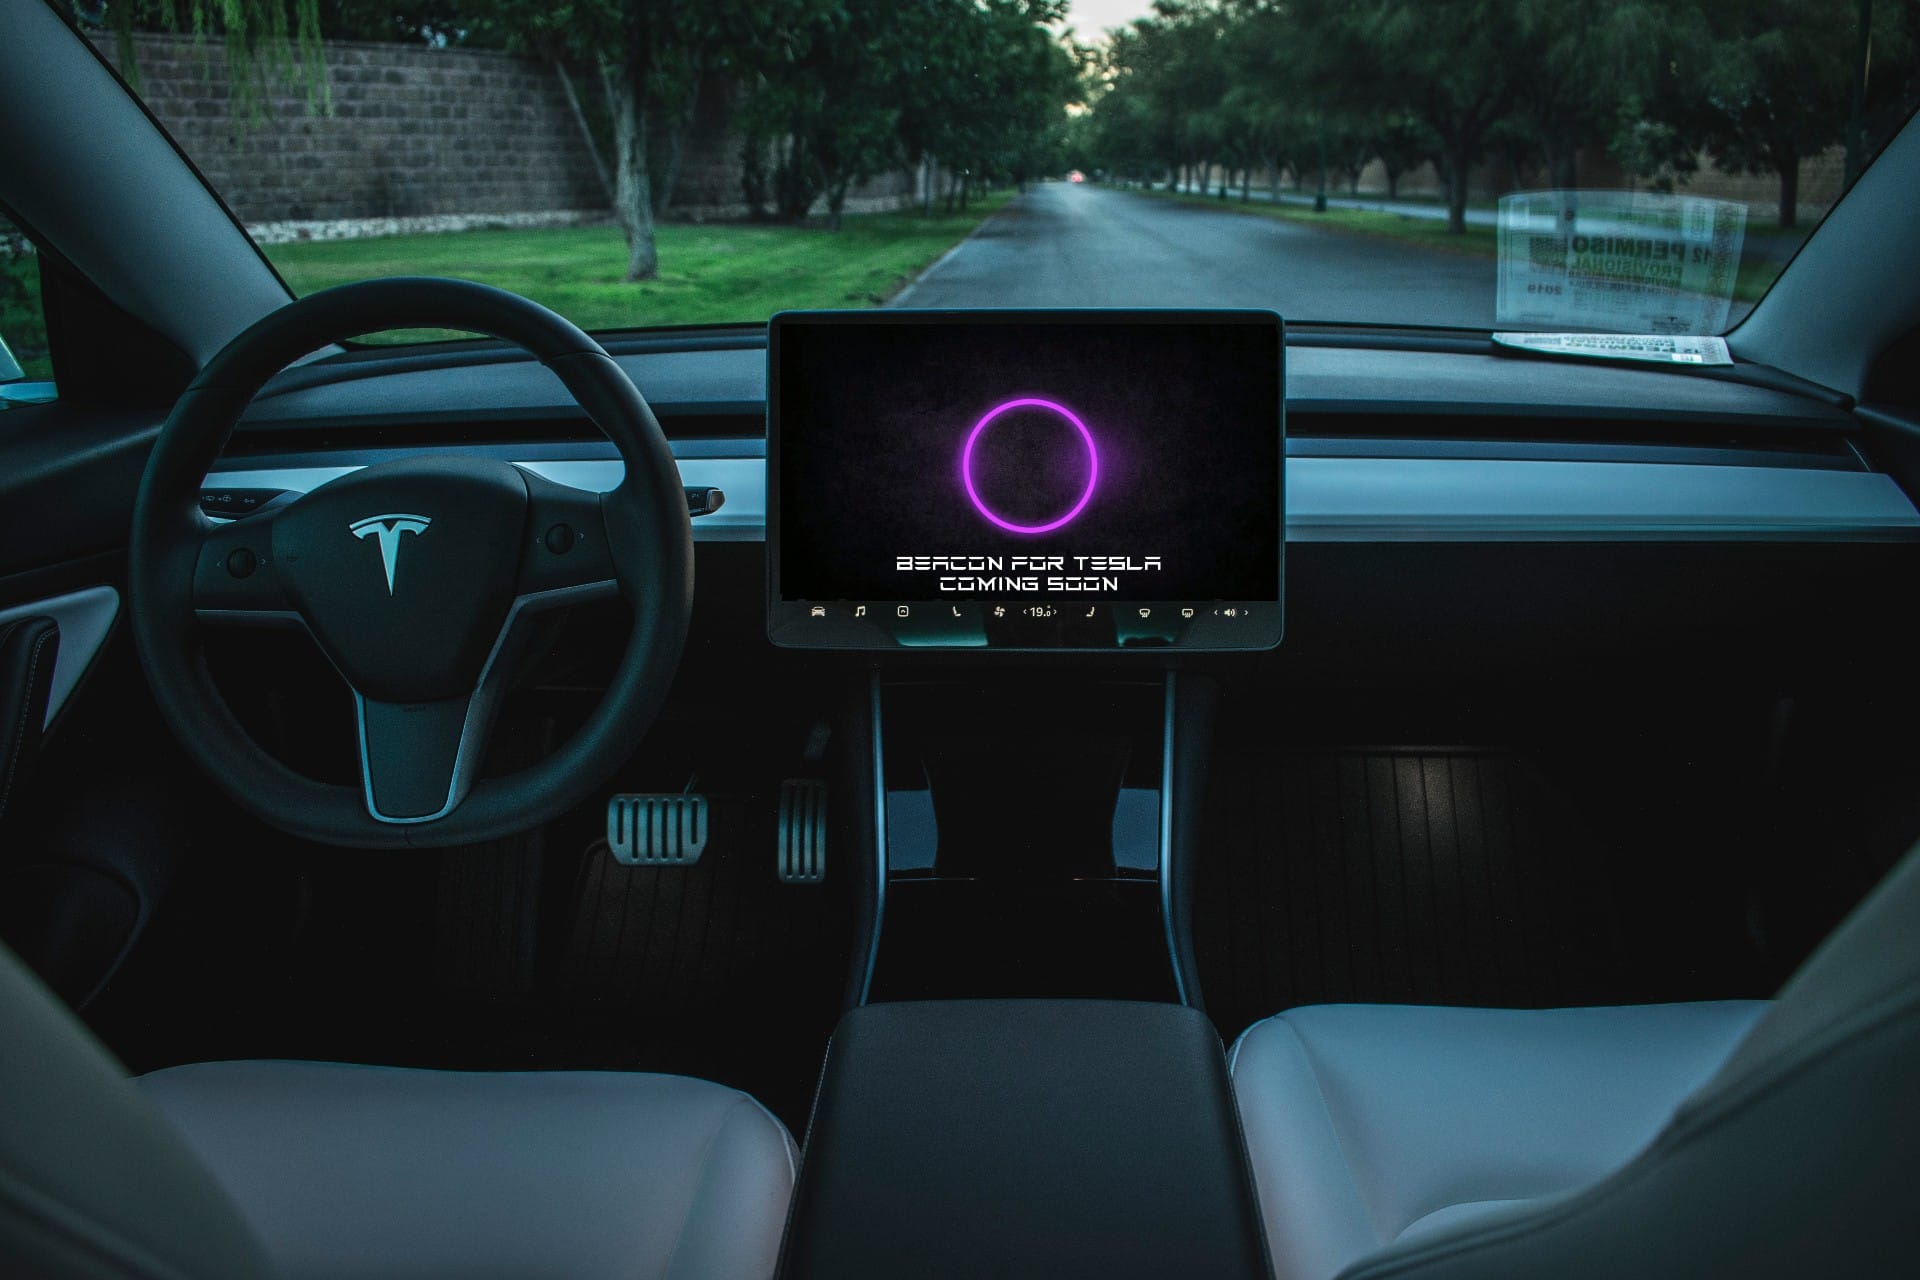 Tesla owner brings incar video conference calls to his Model S in